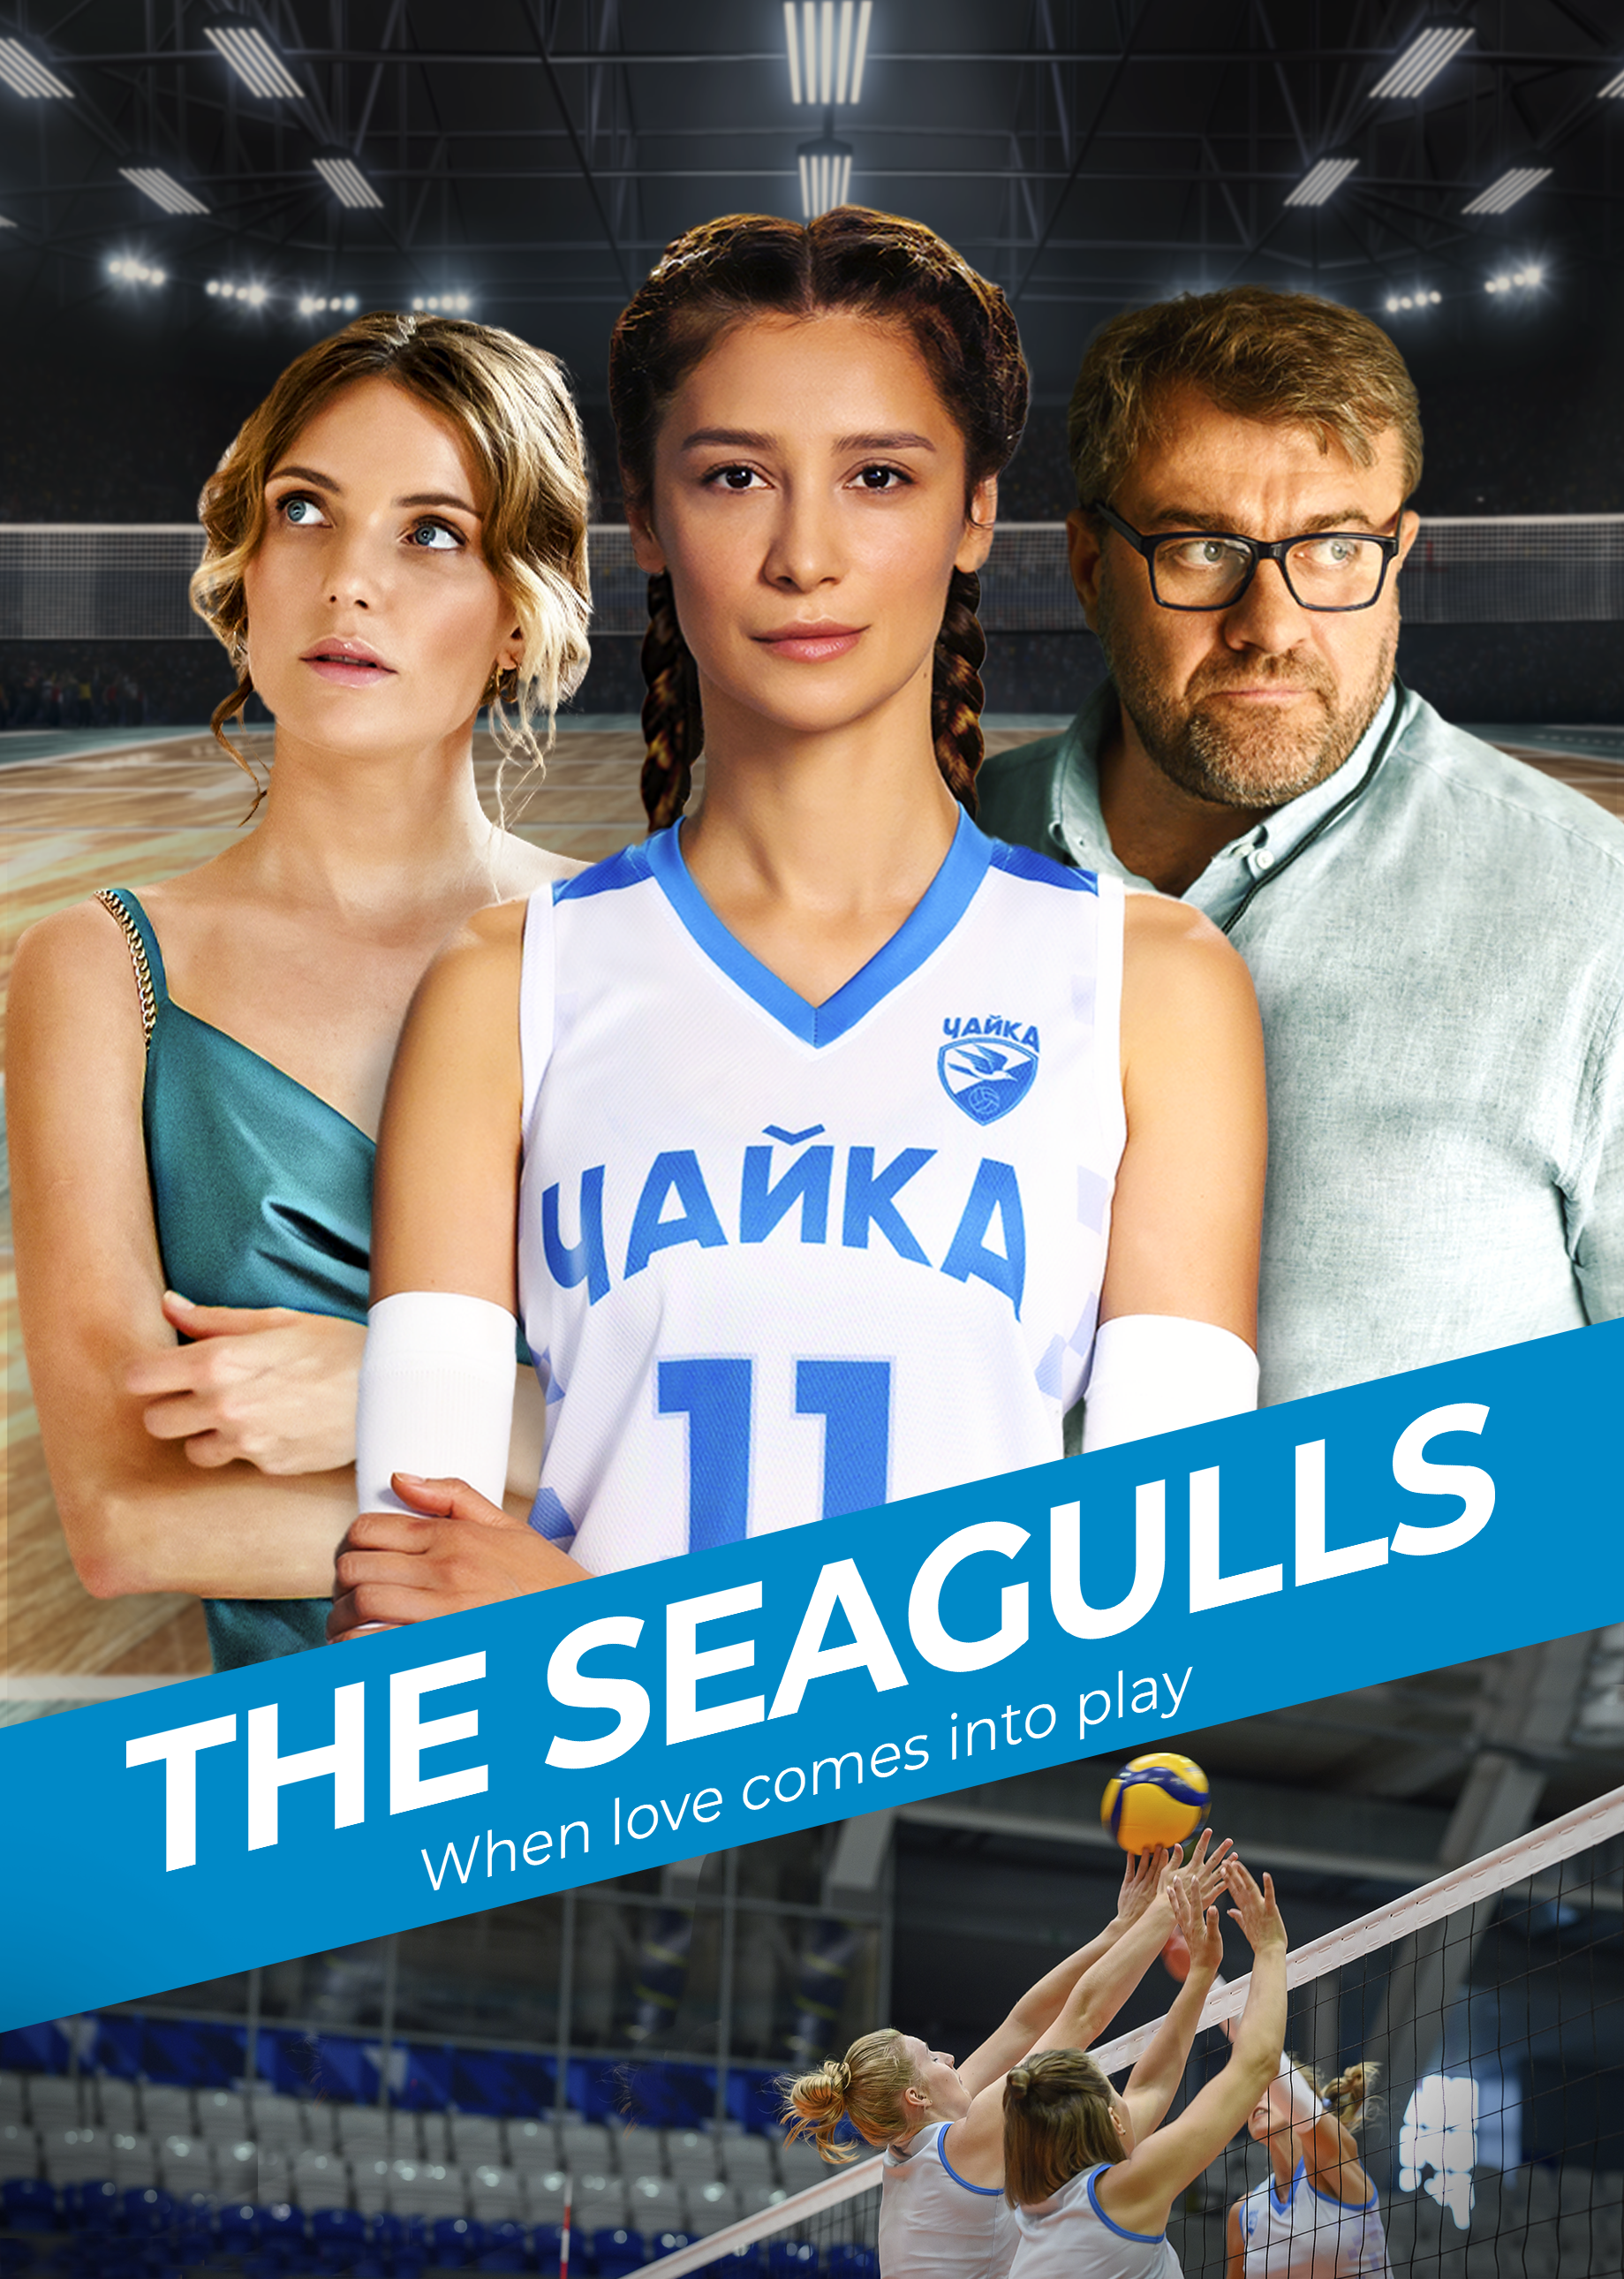 THE SEAGULLS AND DREAMCATCHER TO AIR ON MONGOL TV